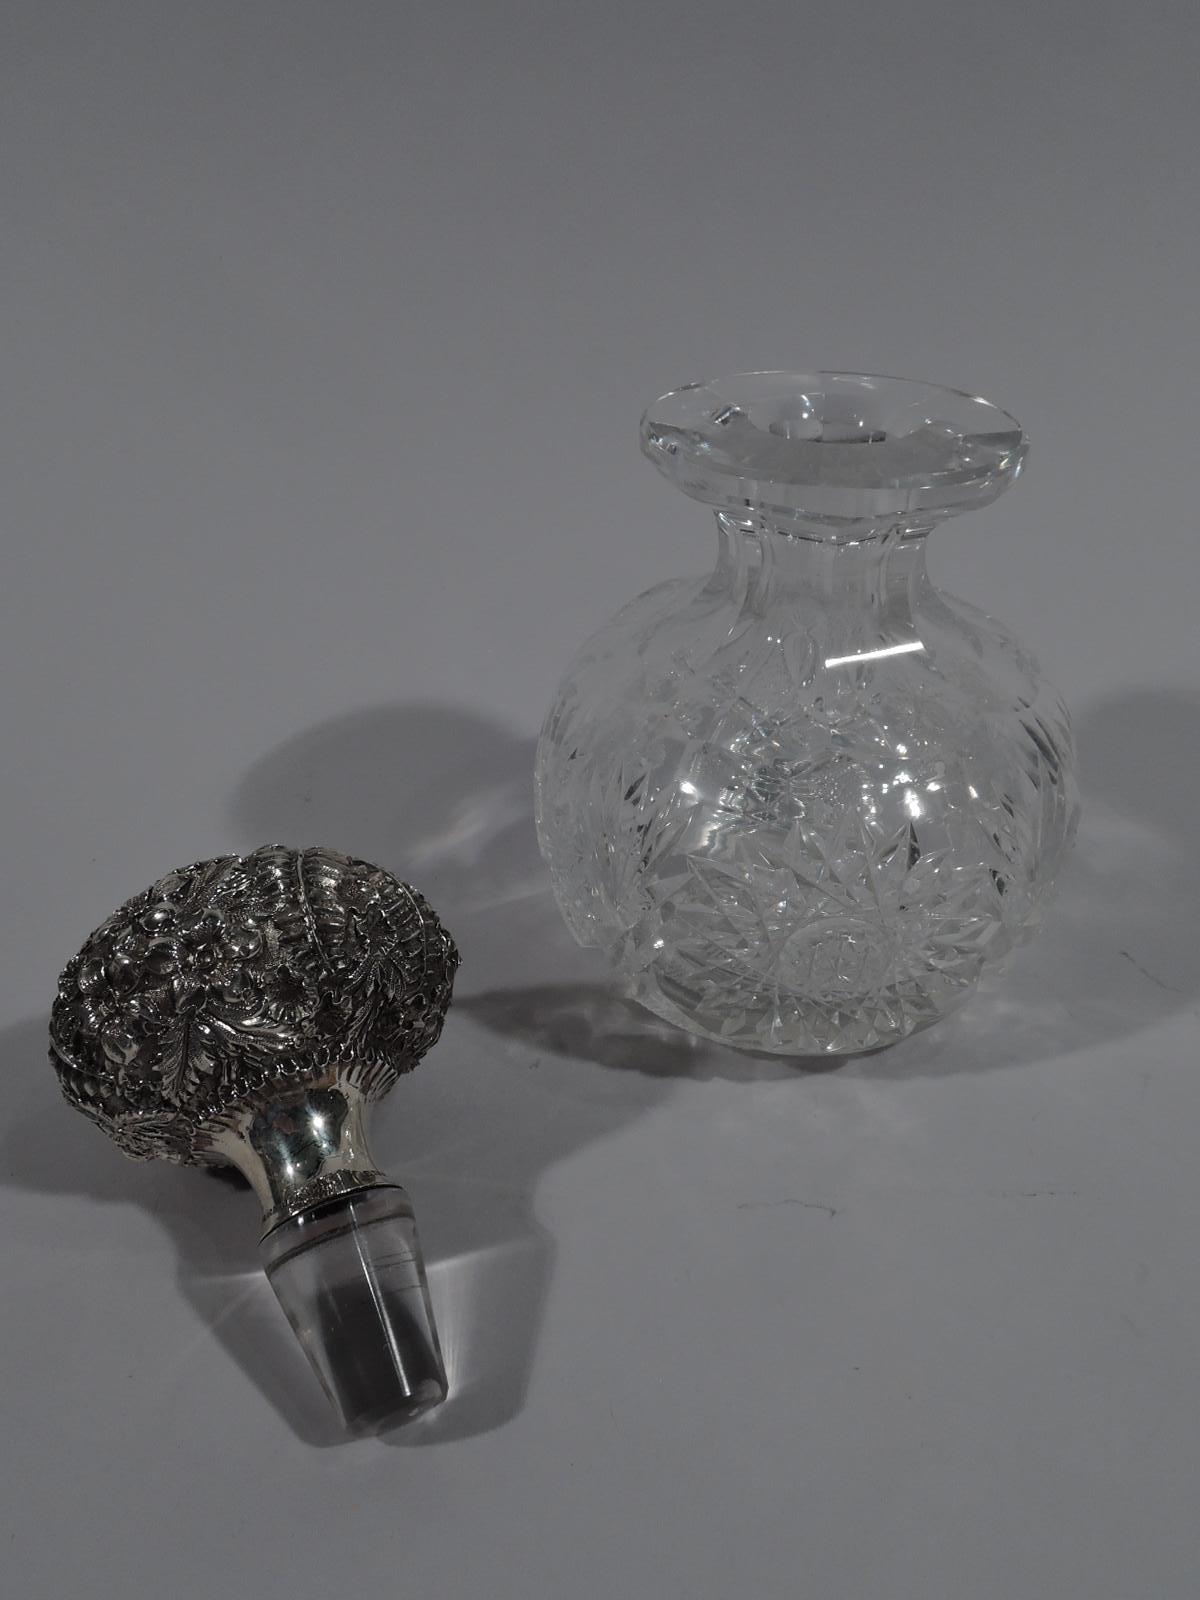 Turn-of-the-century cut-glass perfume bottle with sterling silver stopper. Globular with short and faceted neck and shoulder, and everted rim. Star, fern, and diaper ornament. Globular stopper with dense repousse-style flowers and ferns on stippled